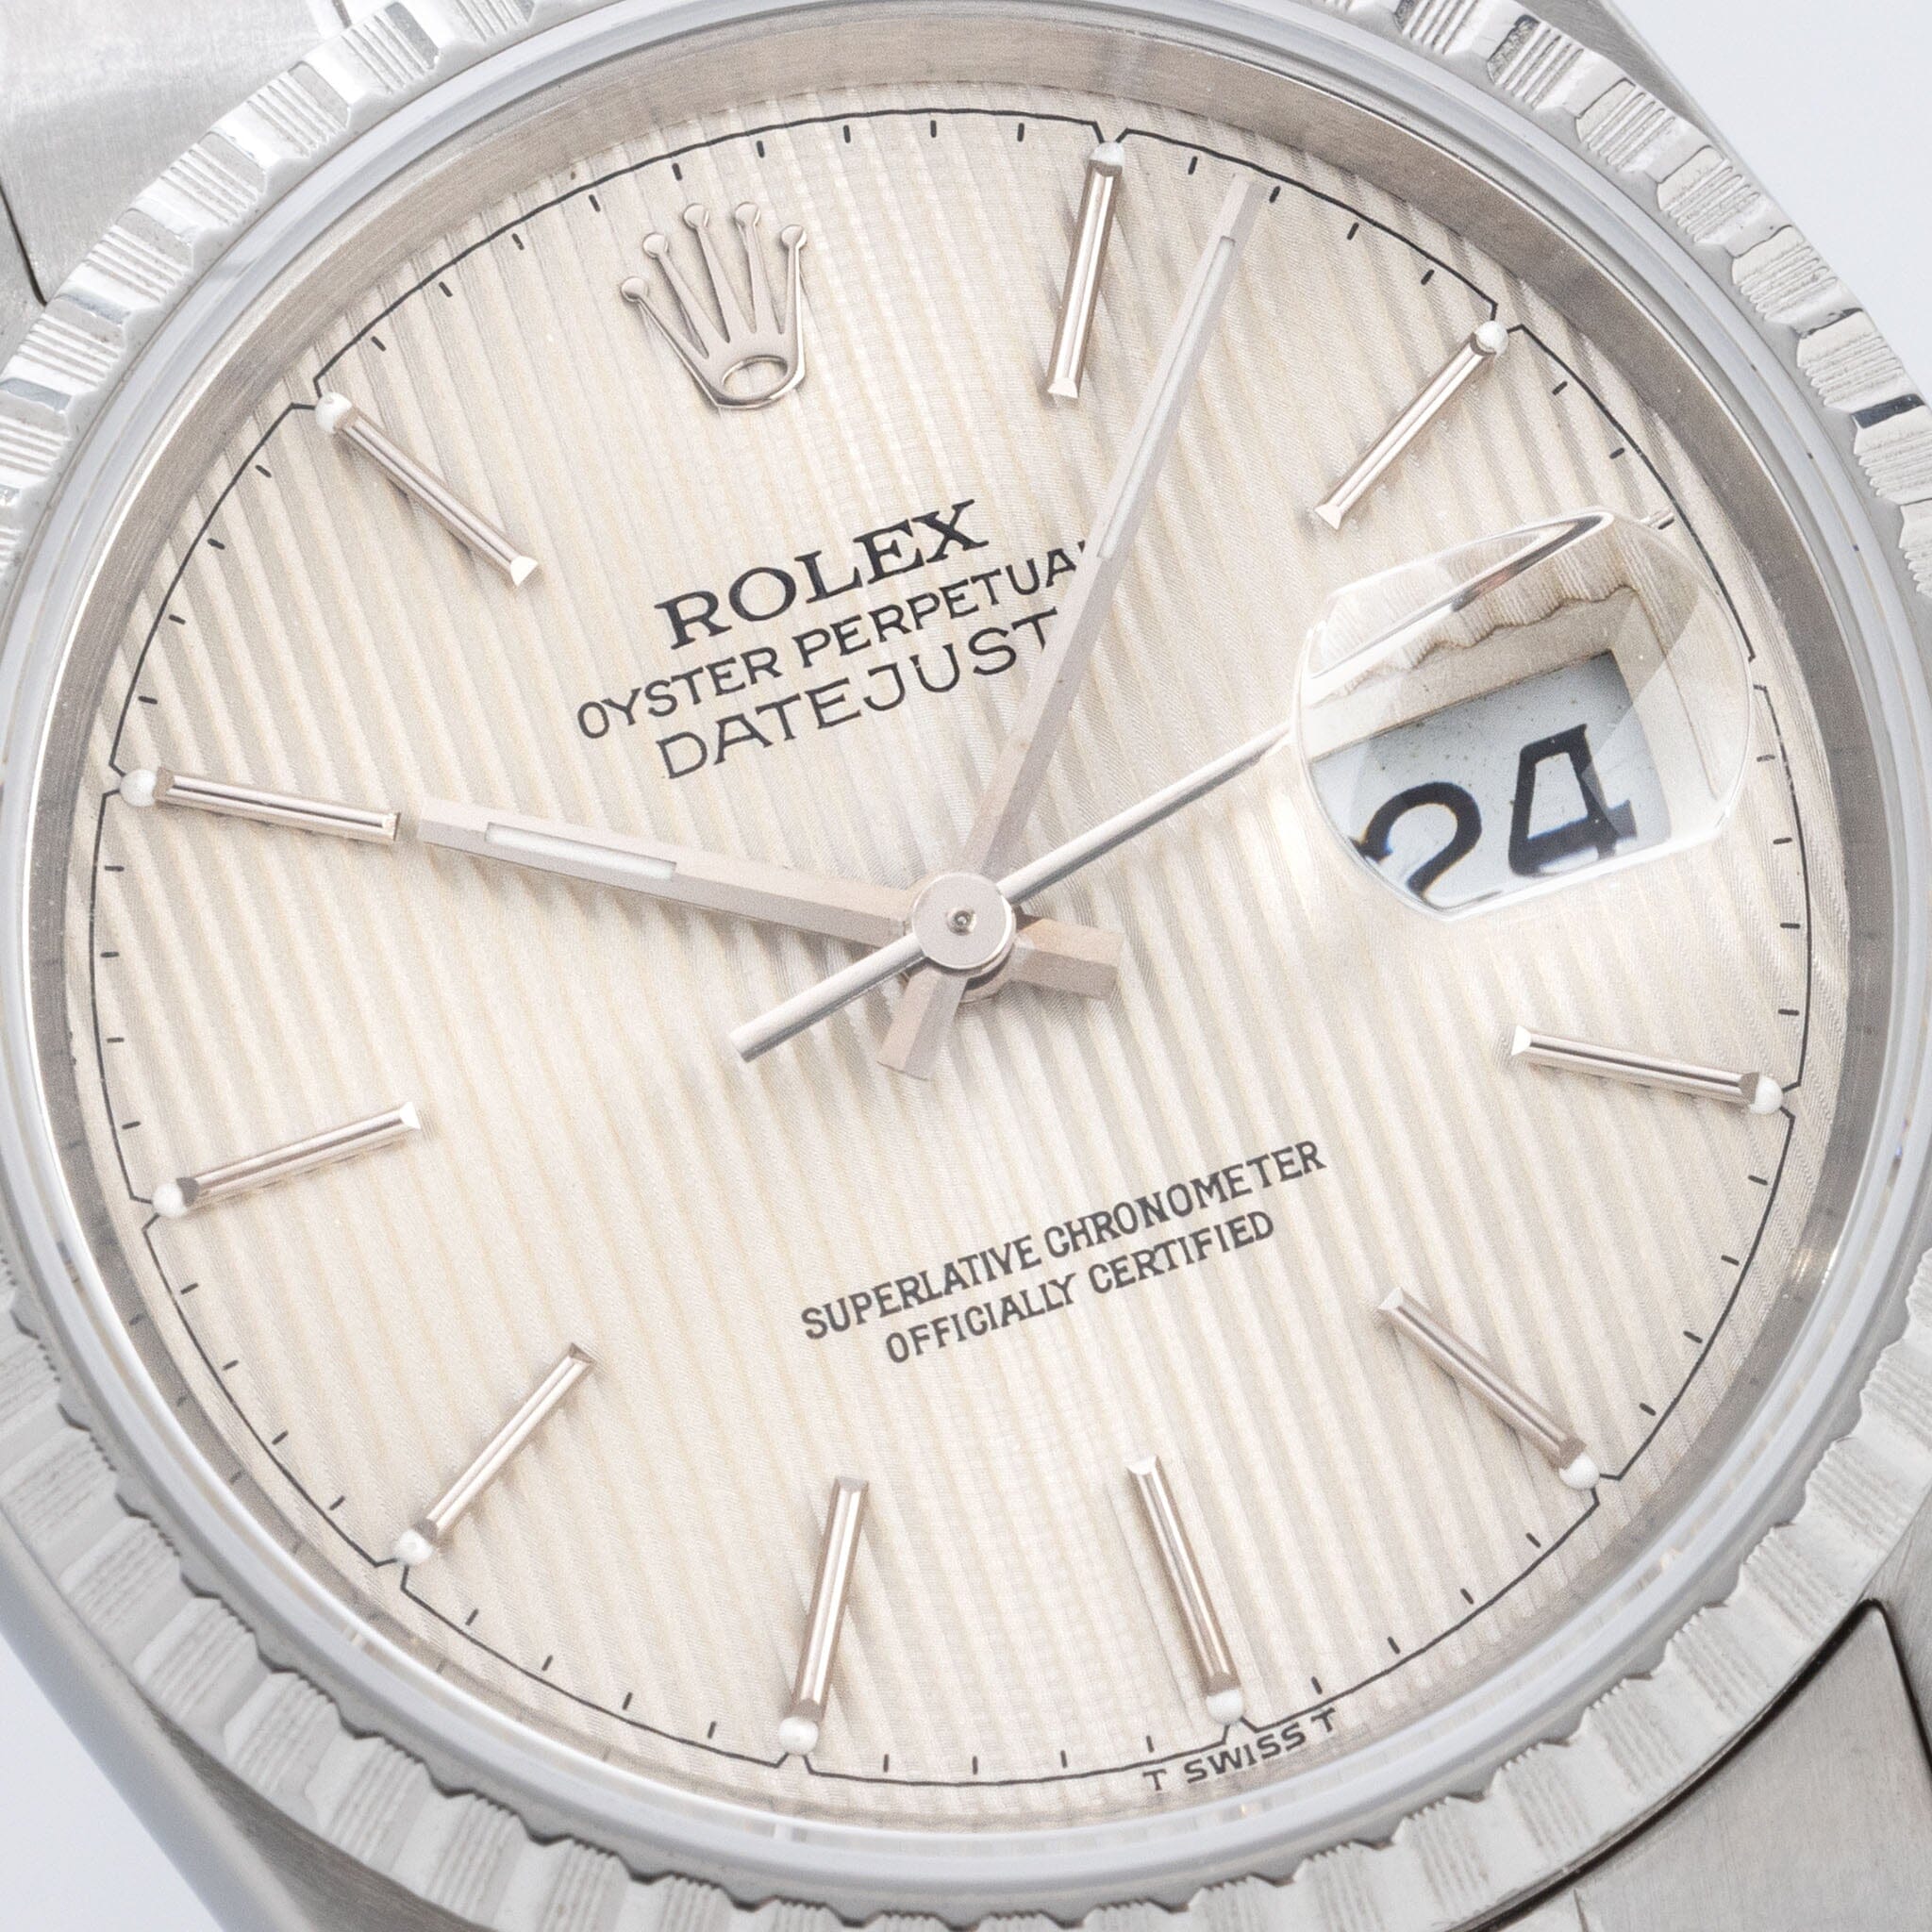 Rolex Datejust Silver Tapestry Dial ref 16220